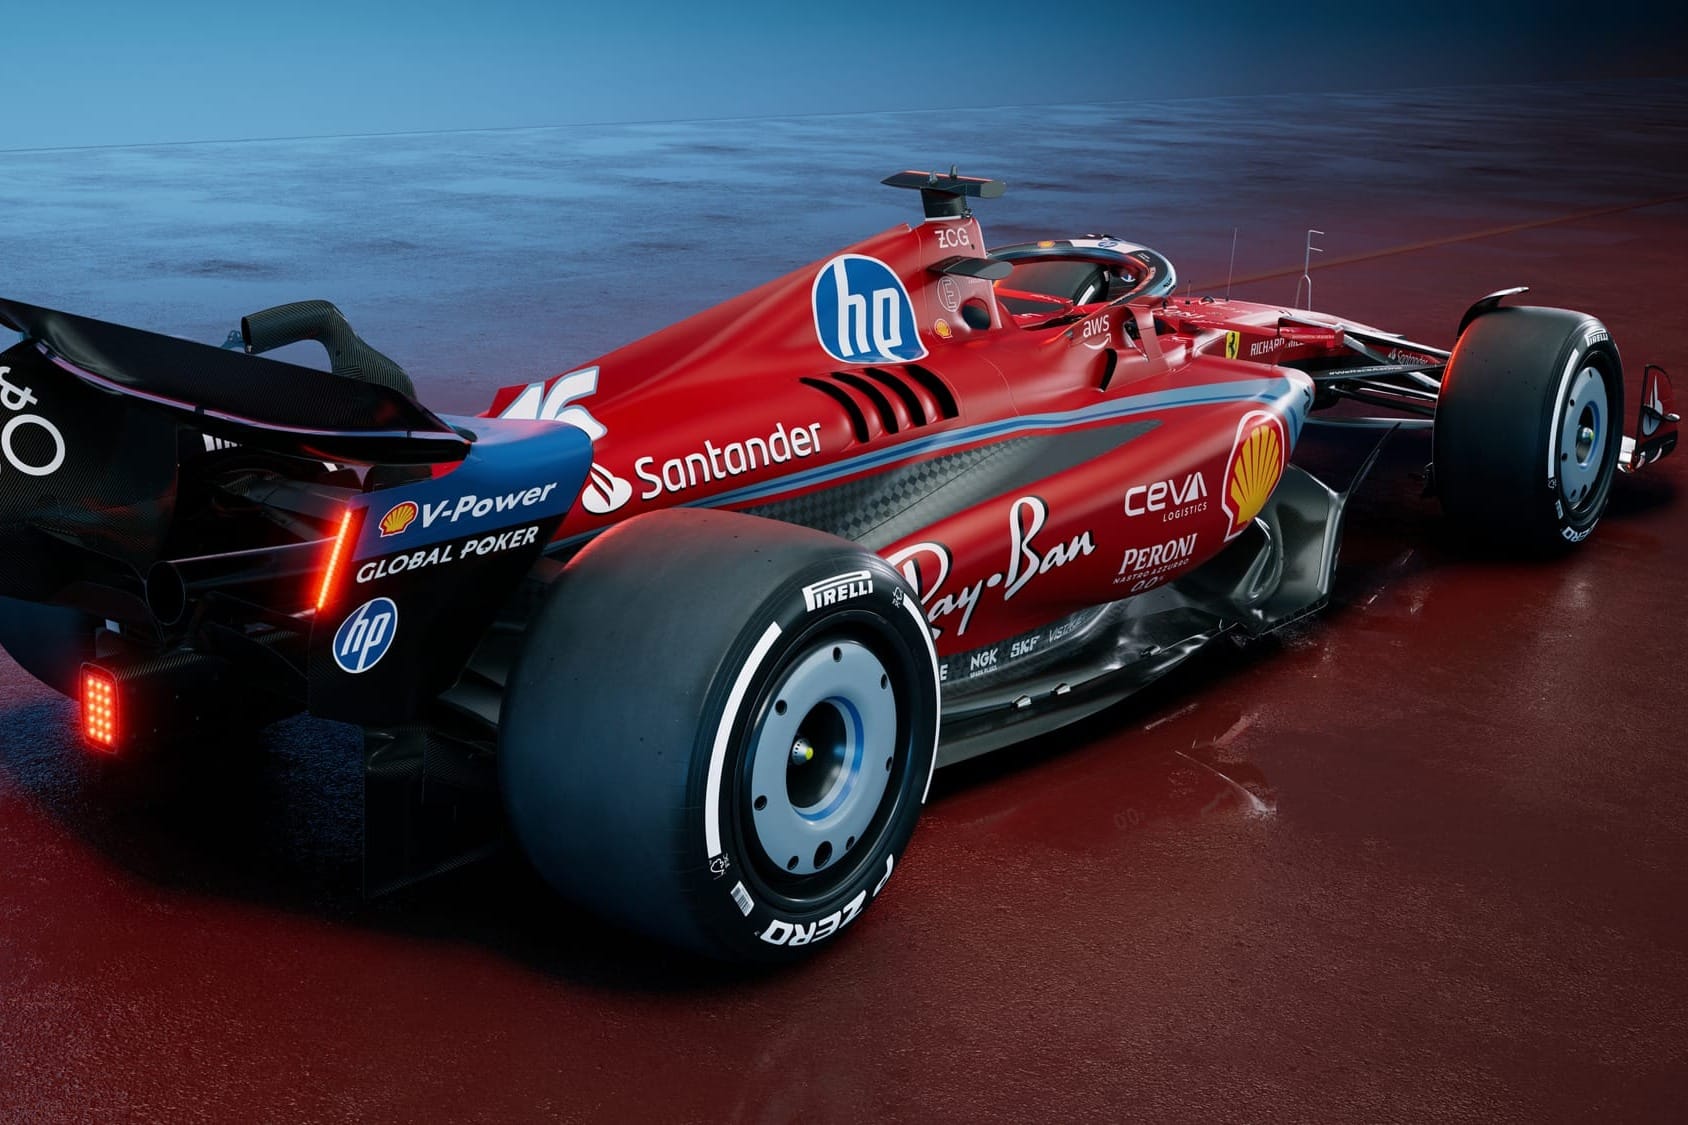 'Blue' Ferrari is another underwhelming one-off F1 livery - The Race